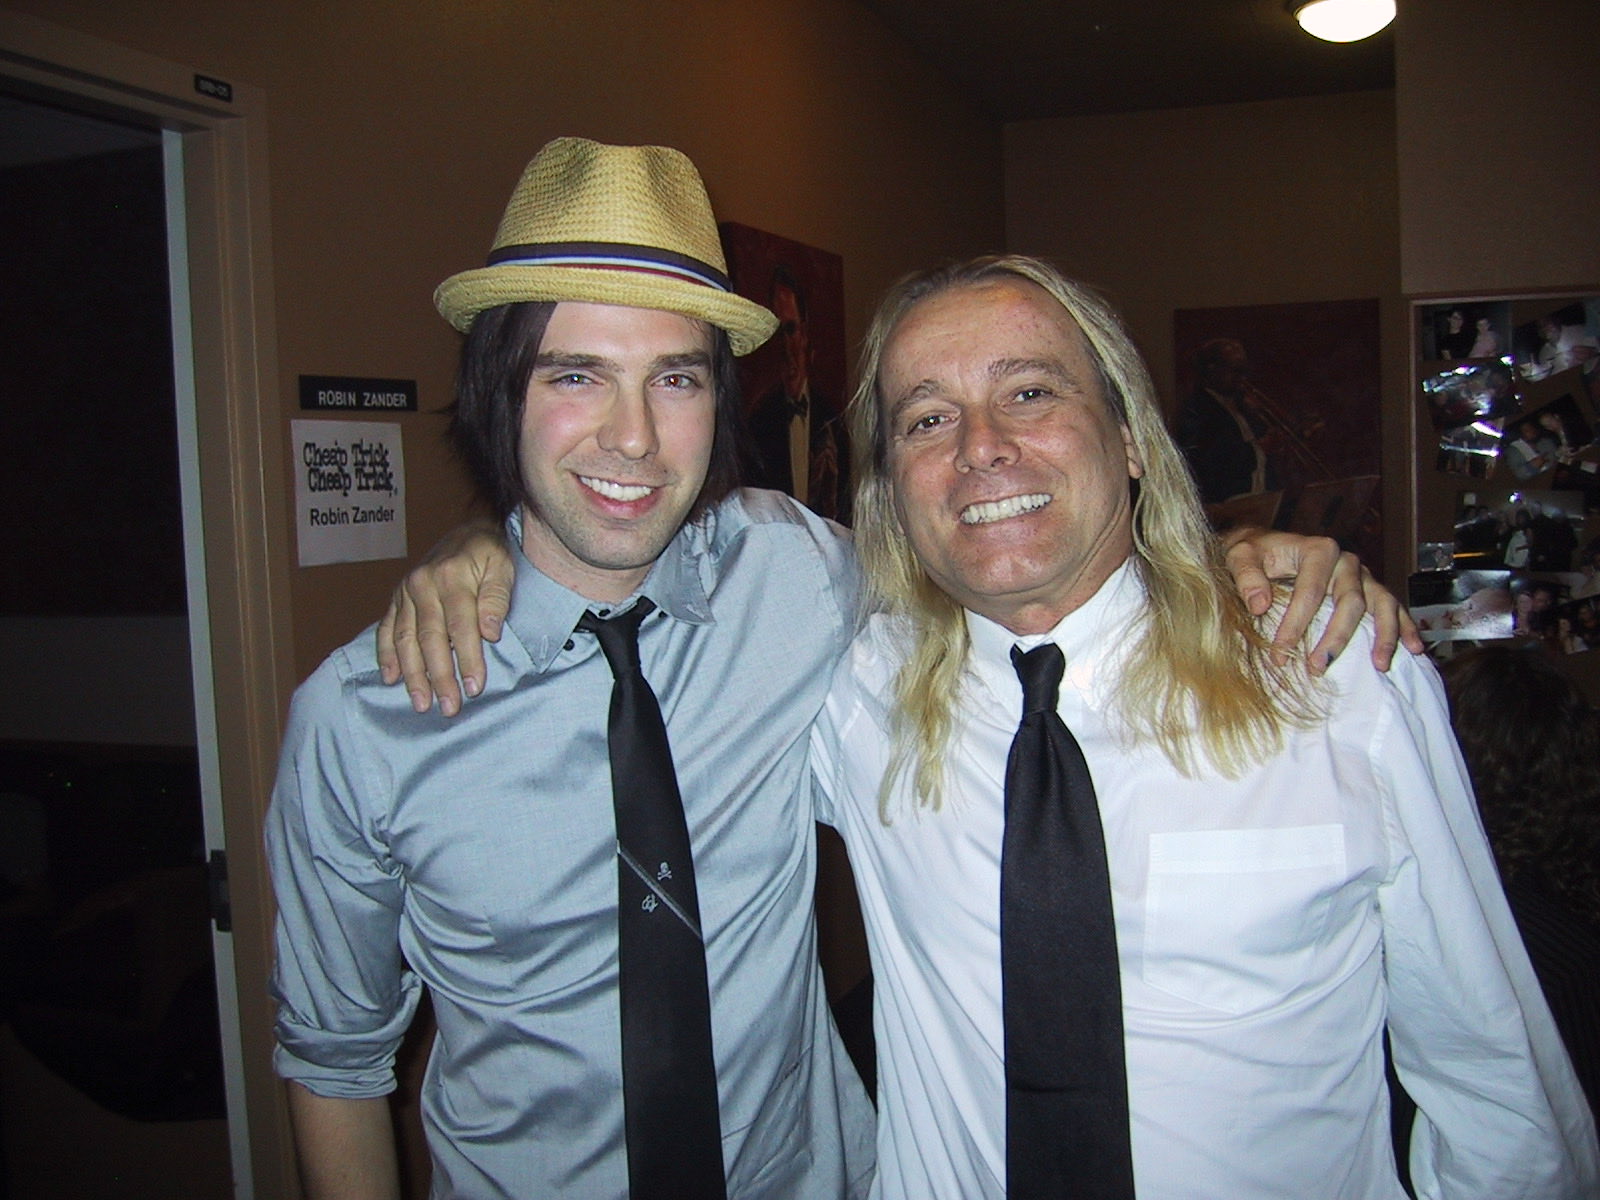 Happy birthday to the singer of my favorite band  Robin Zander!  Ignore my hat 